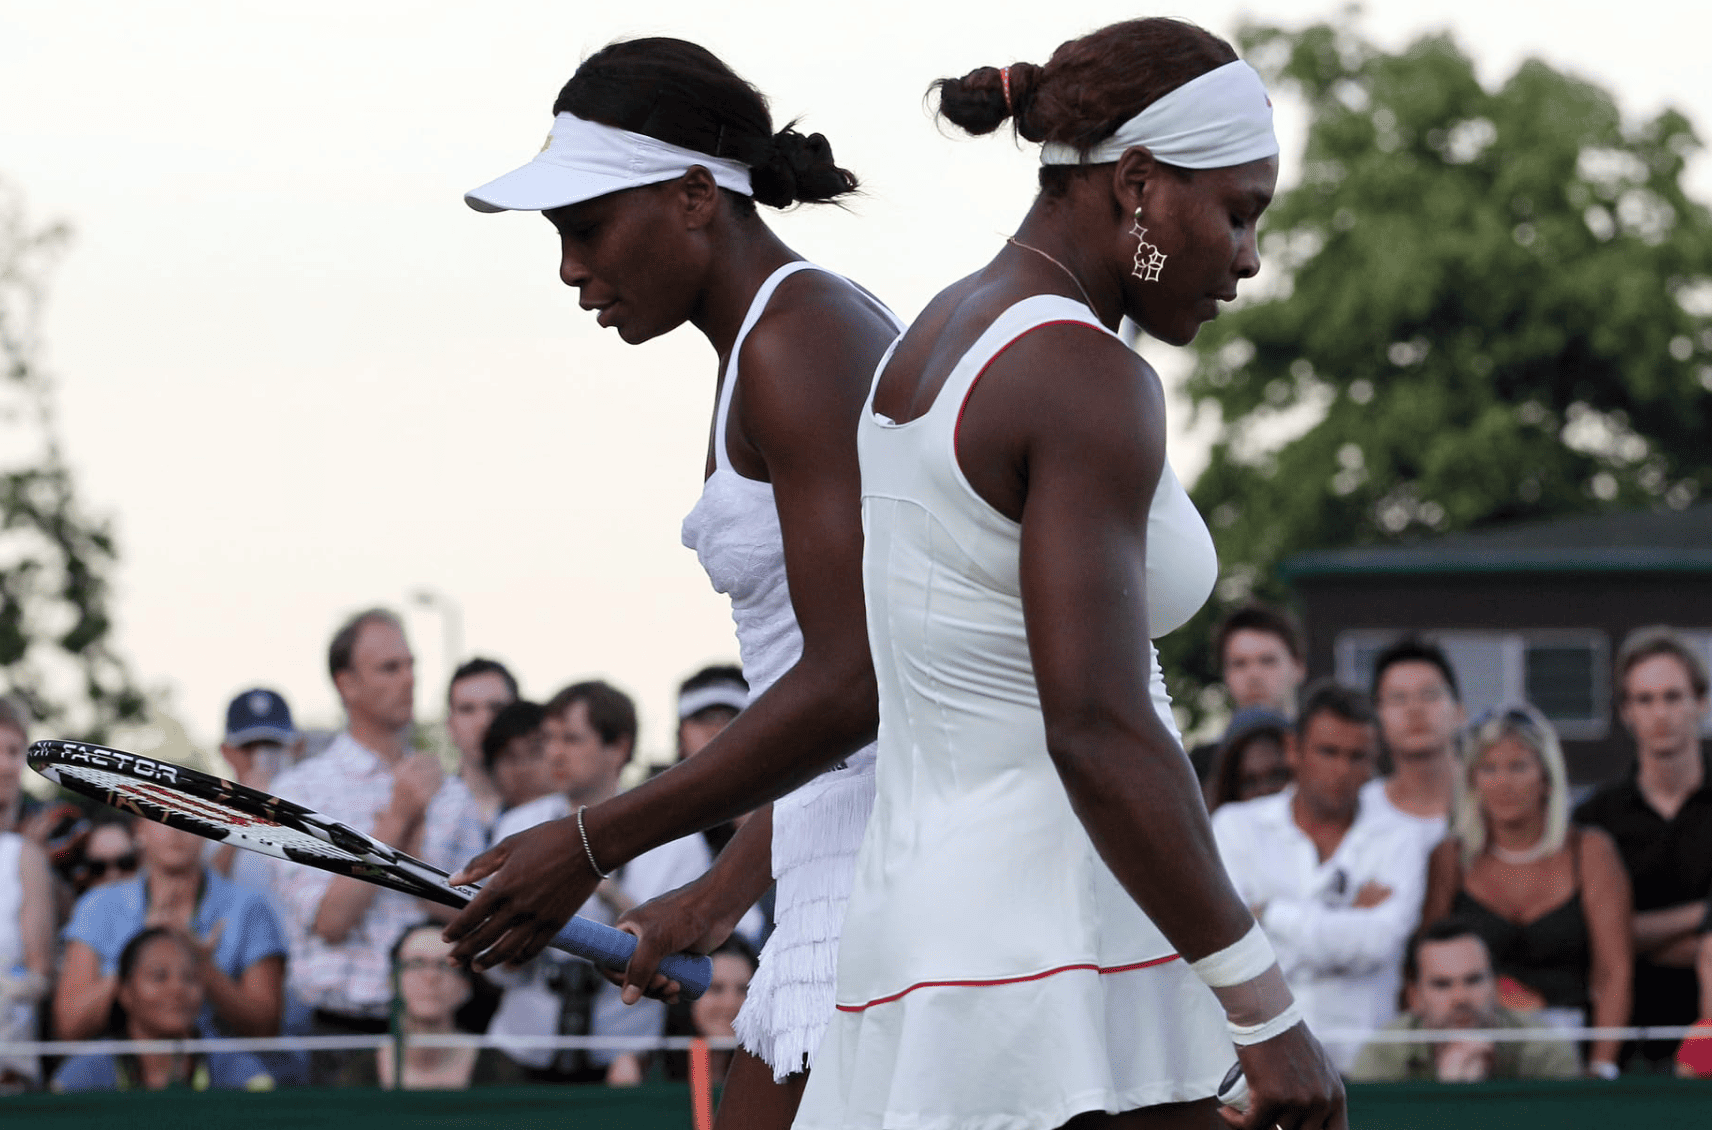 Serena and Venus Williams play as doubles in this image from Magnolia Pictures